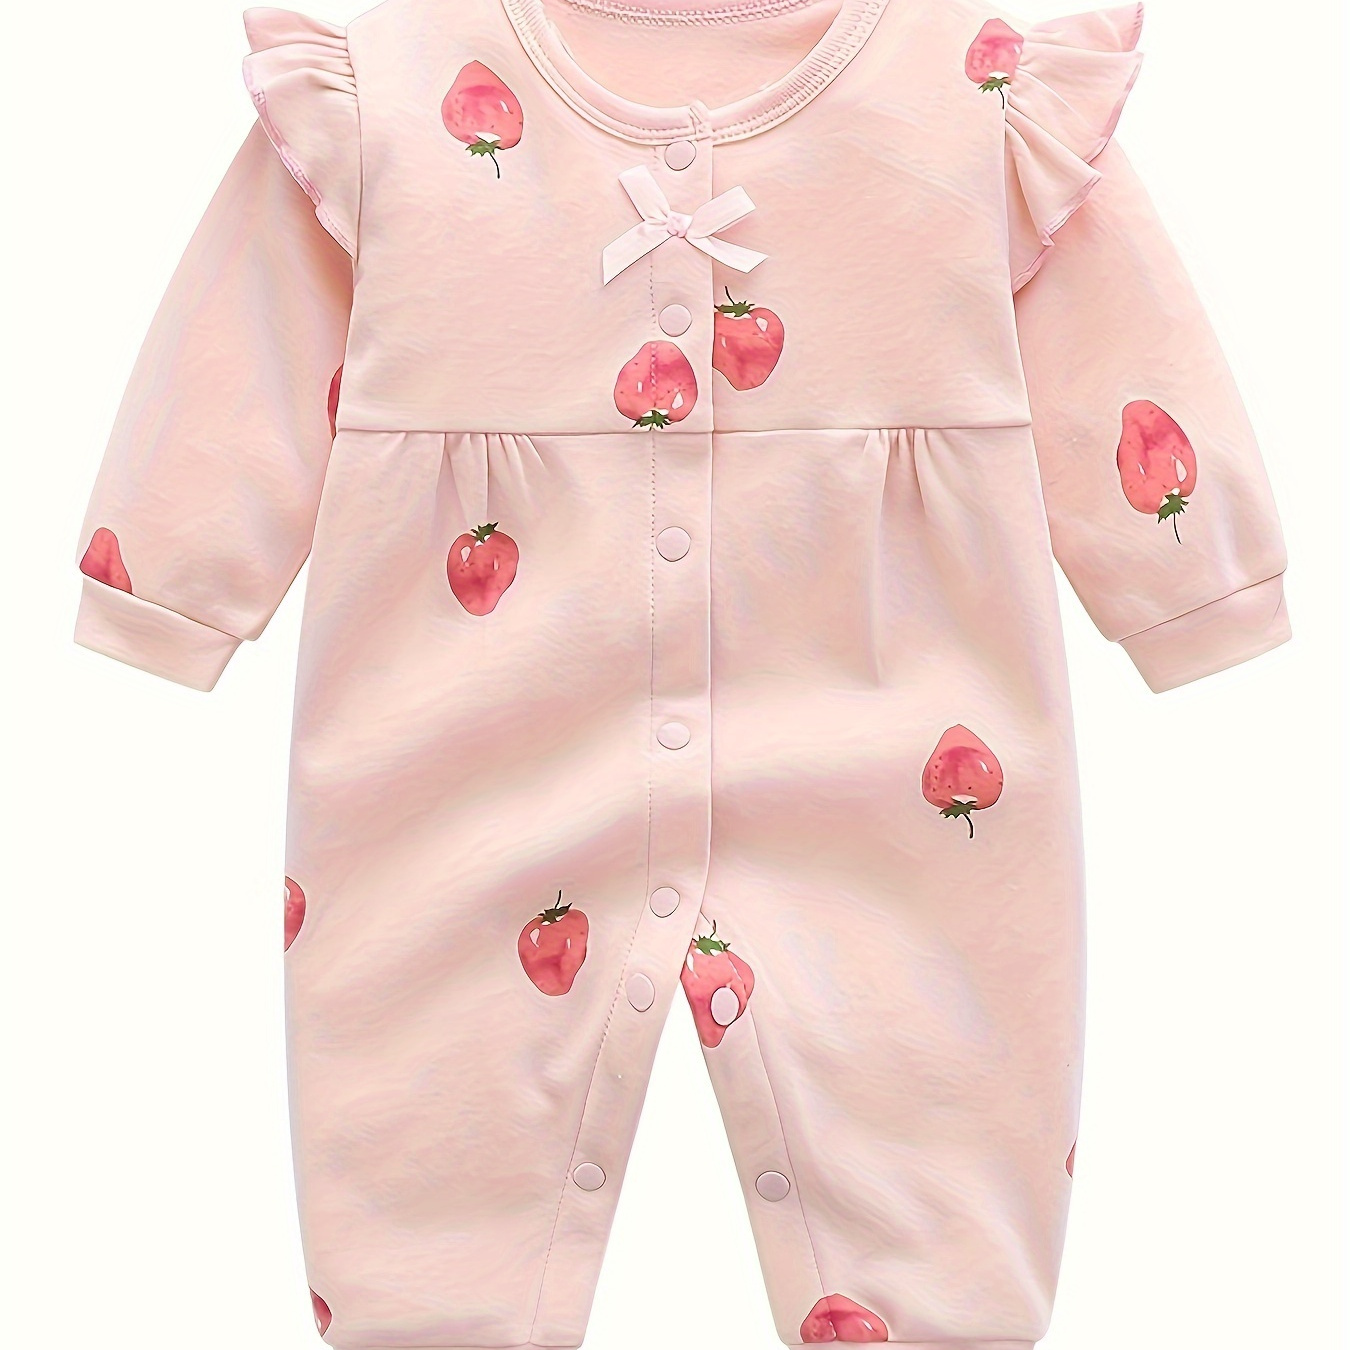 

Infant's Cartoon Strawberry Allover Print Cotton Bodysuit, Casual Long Sleeve Onesie, Baby Girl's Clothing